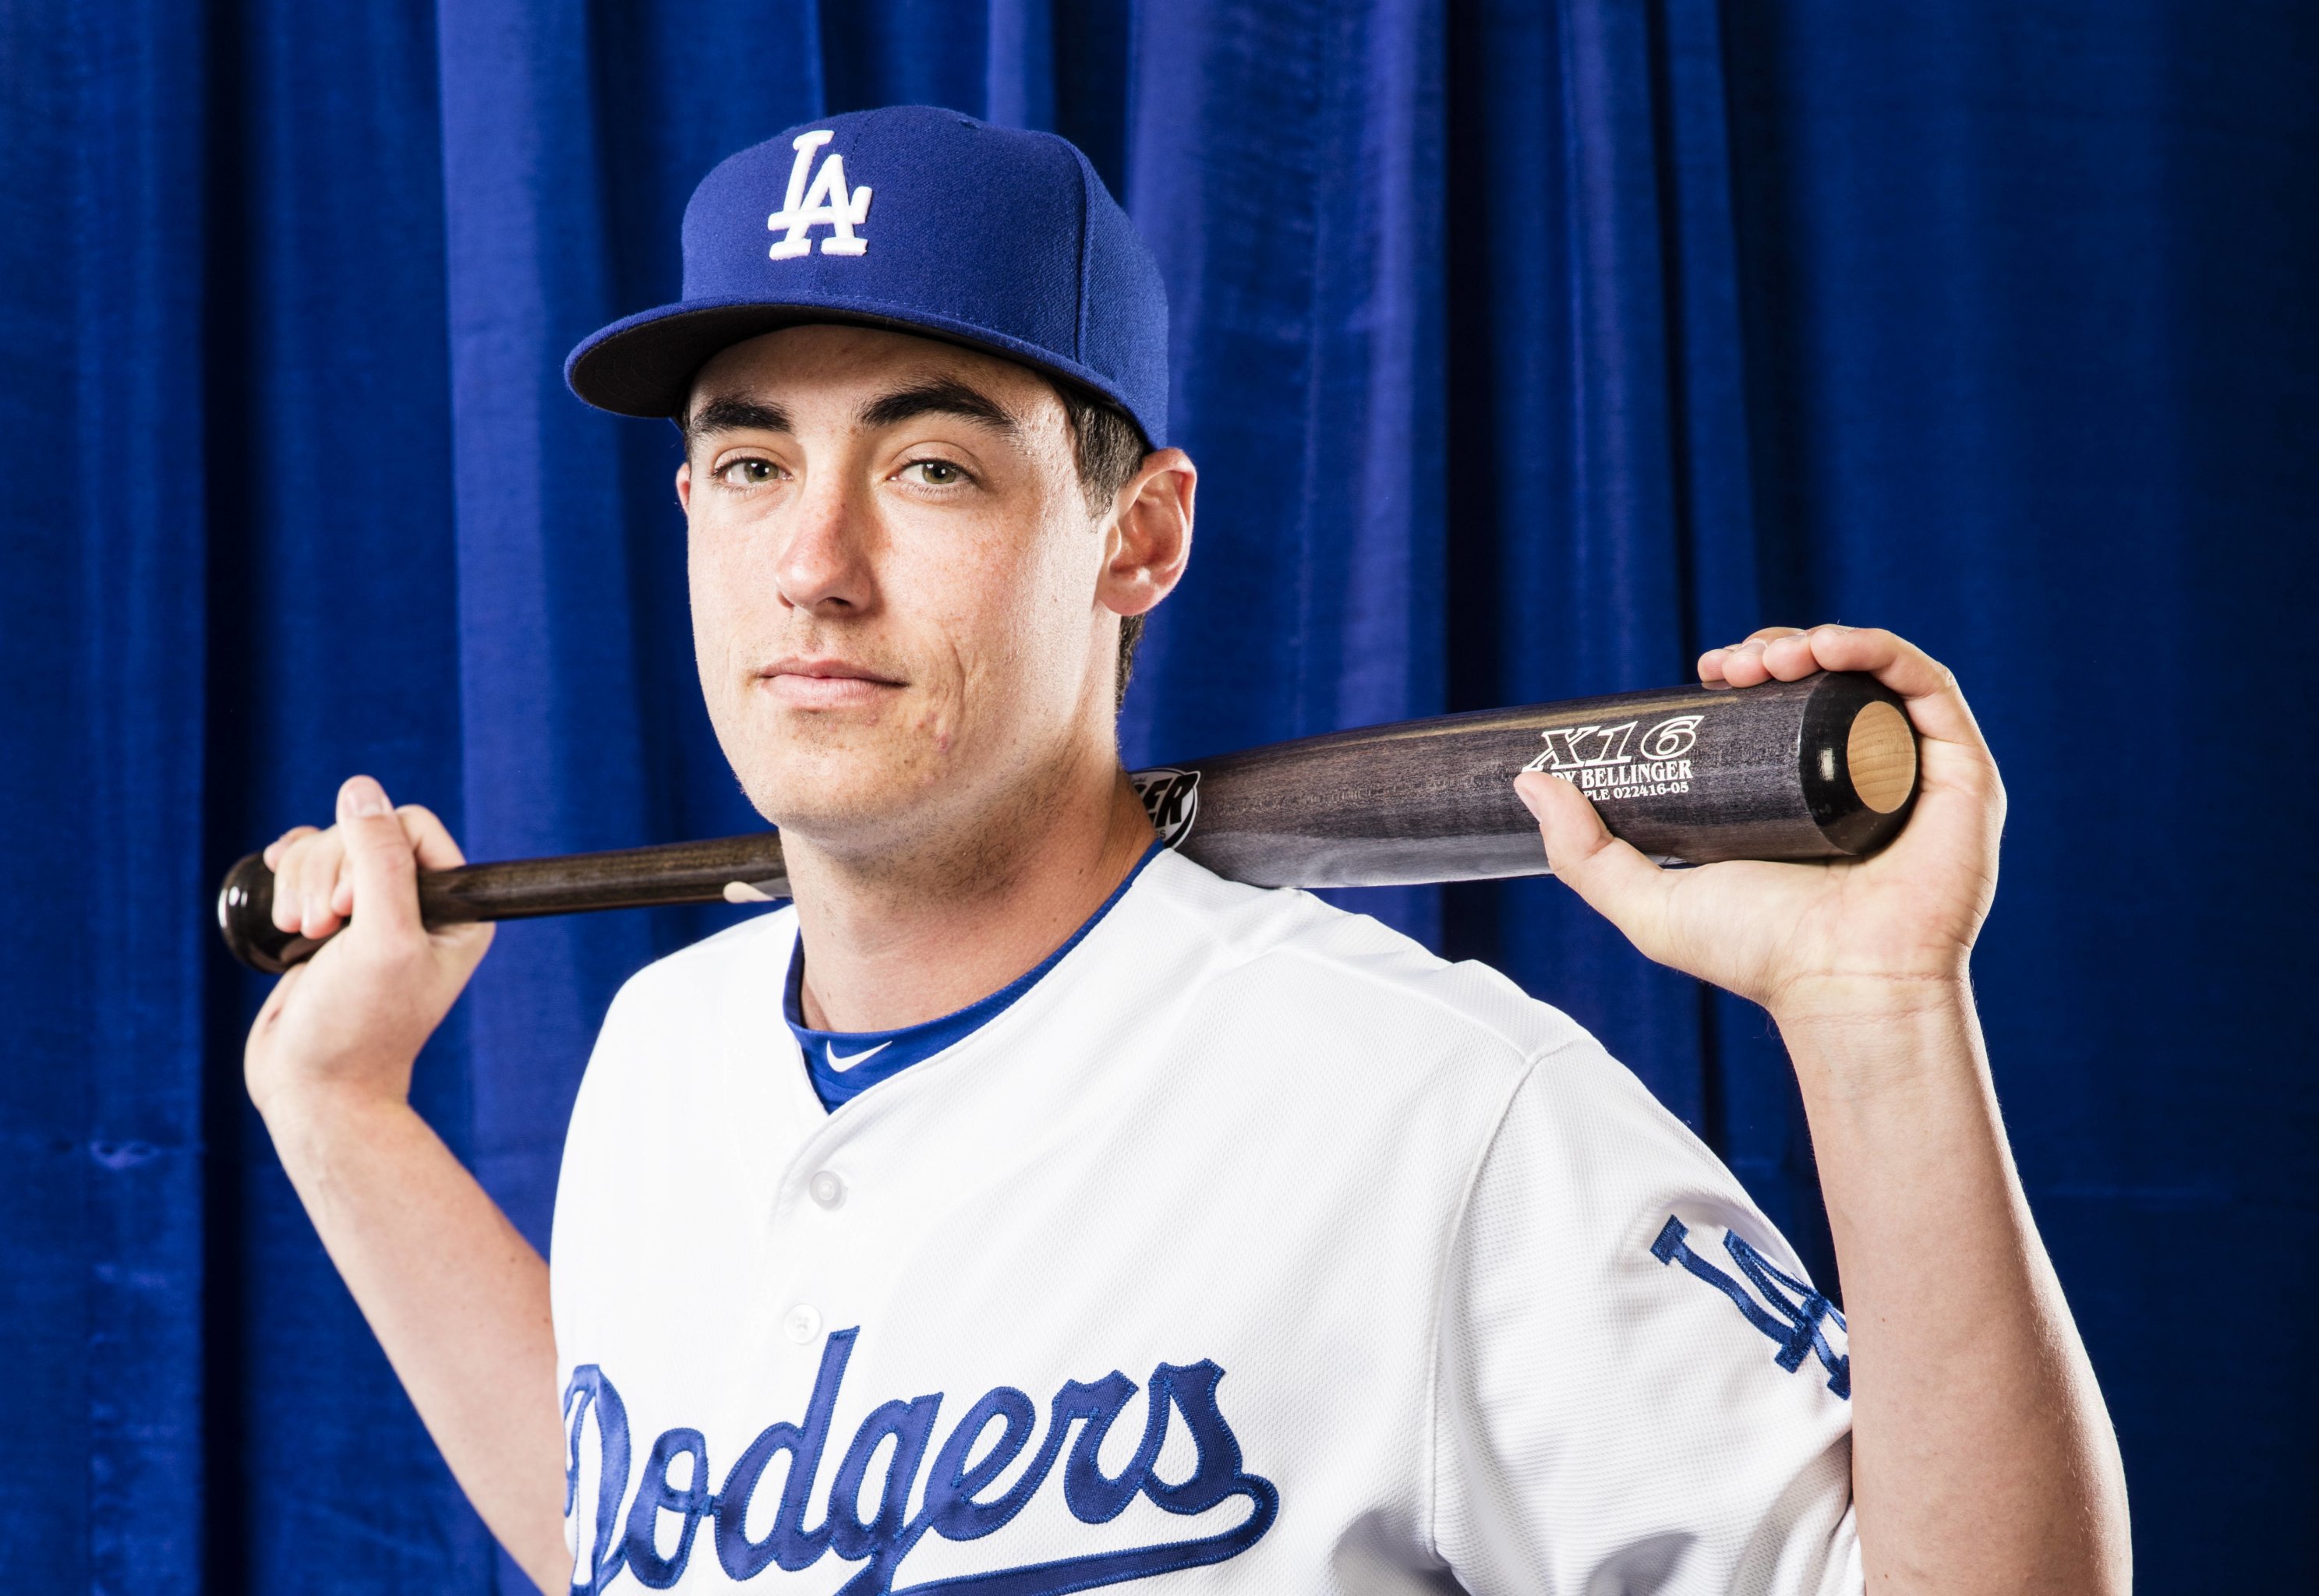 Cody Bellinger Class of 2013 - Player Profile